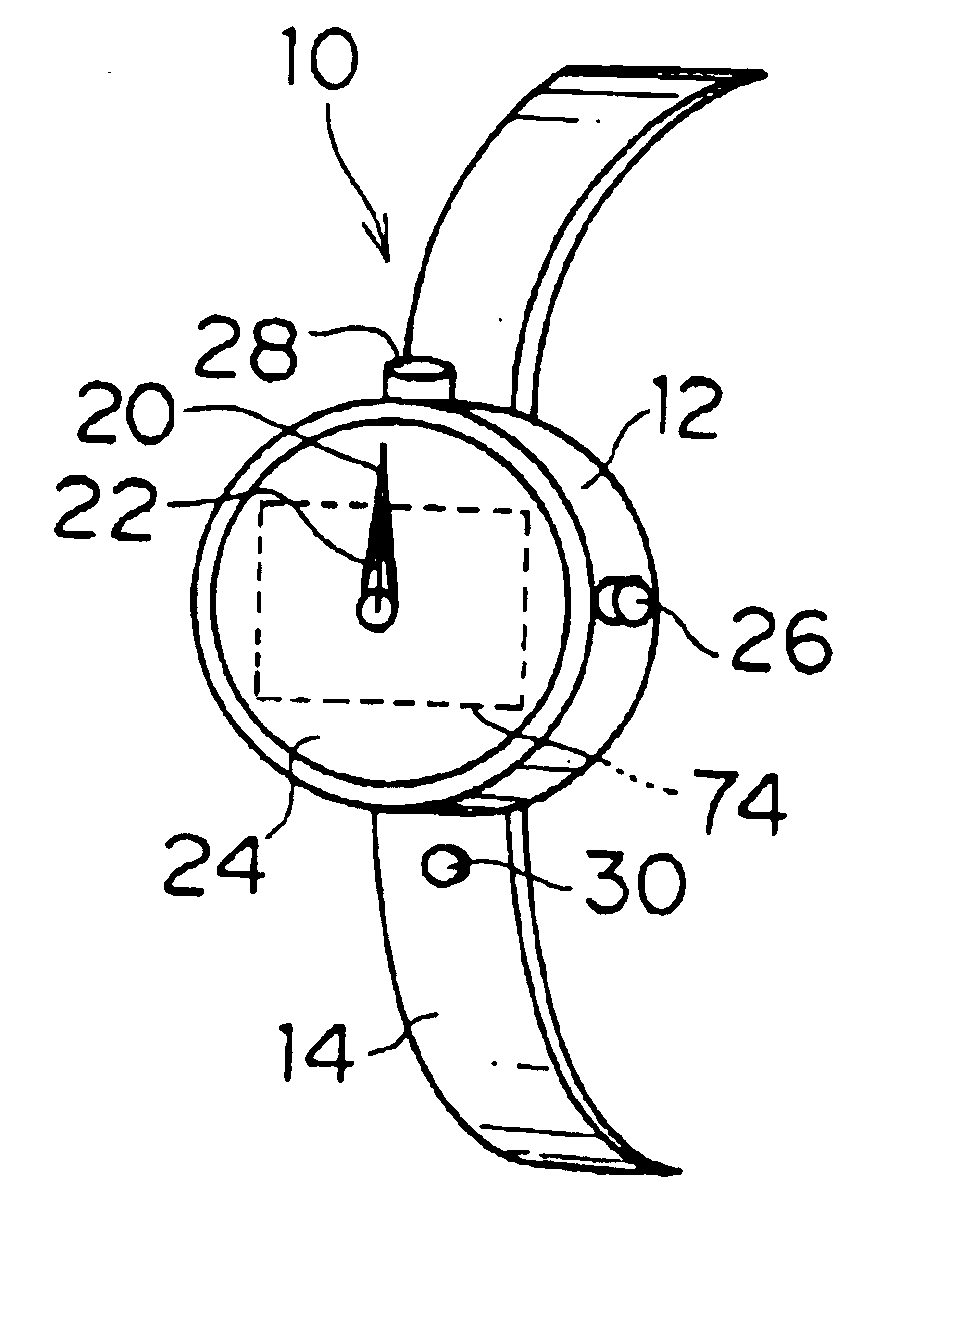 Wrist-carried camera and watch-type information equipment